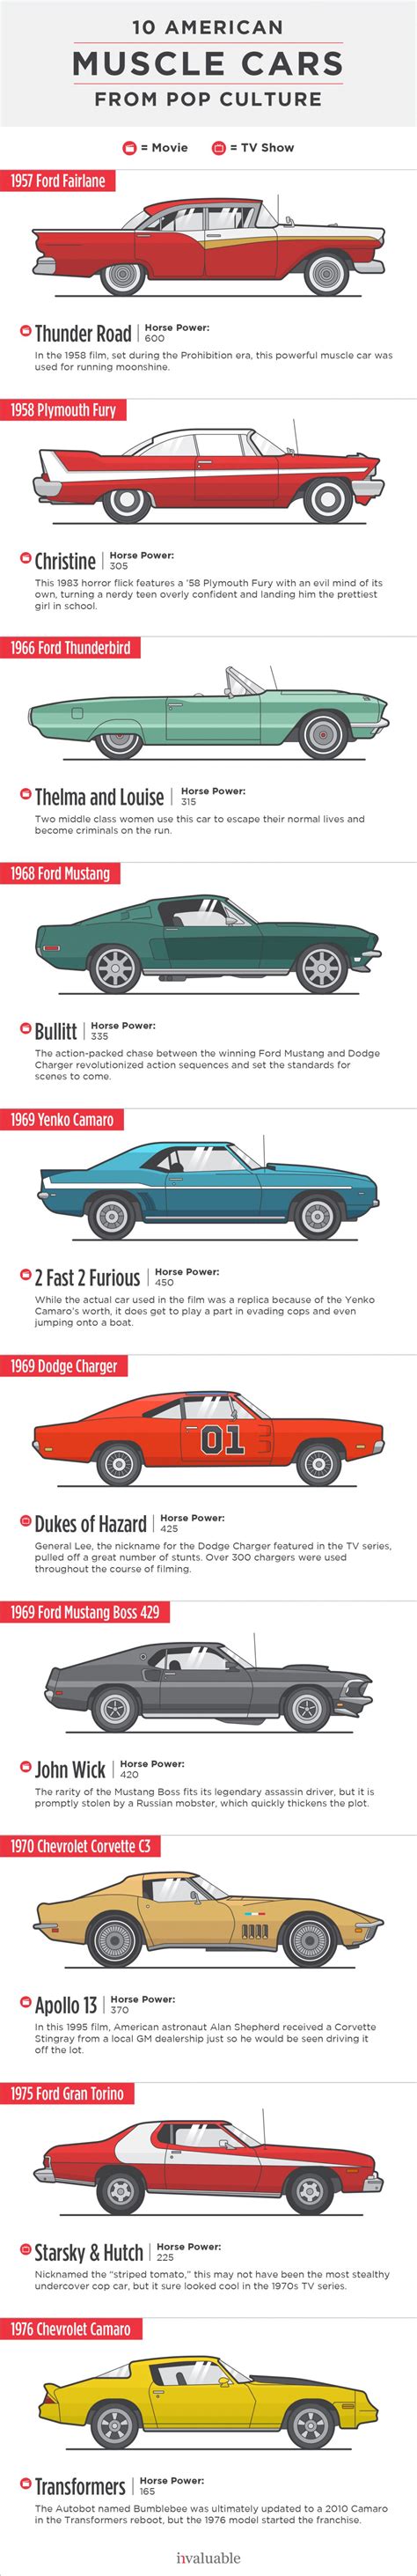 10 Famous American Muscle Cars From Pop Culture Invaluable